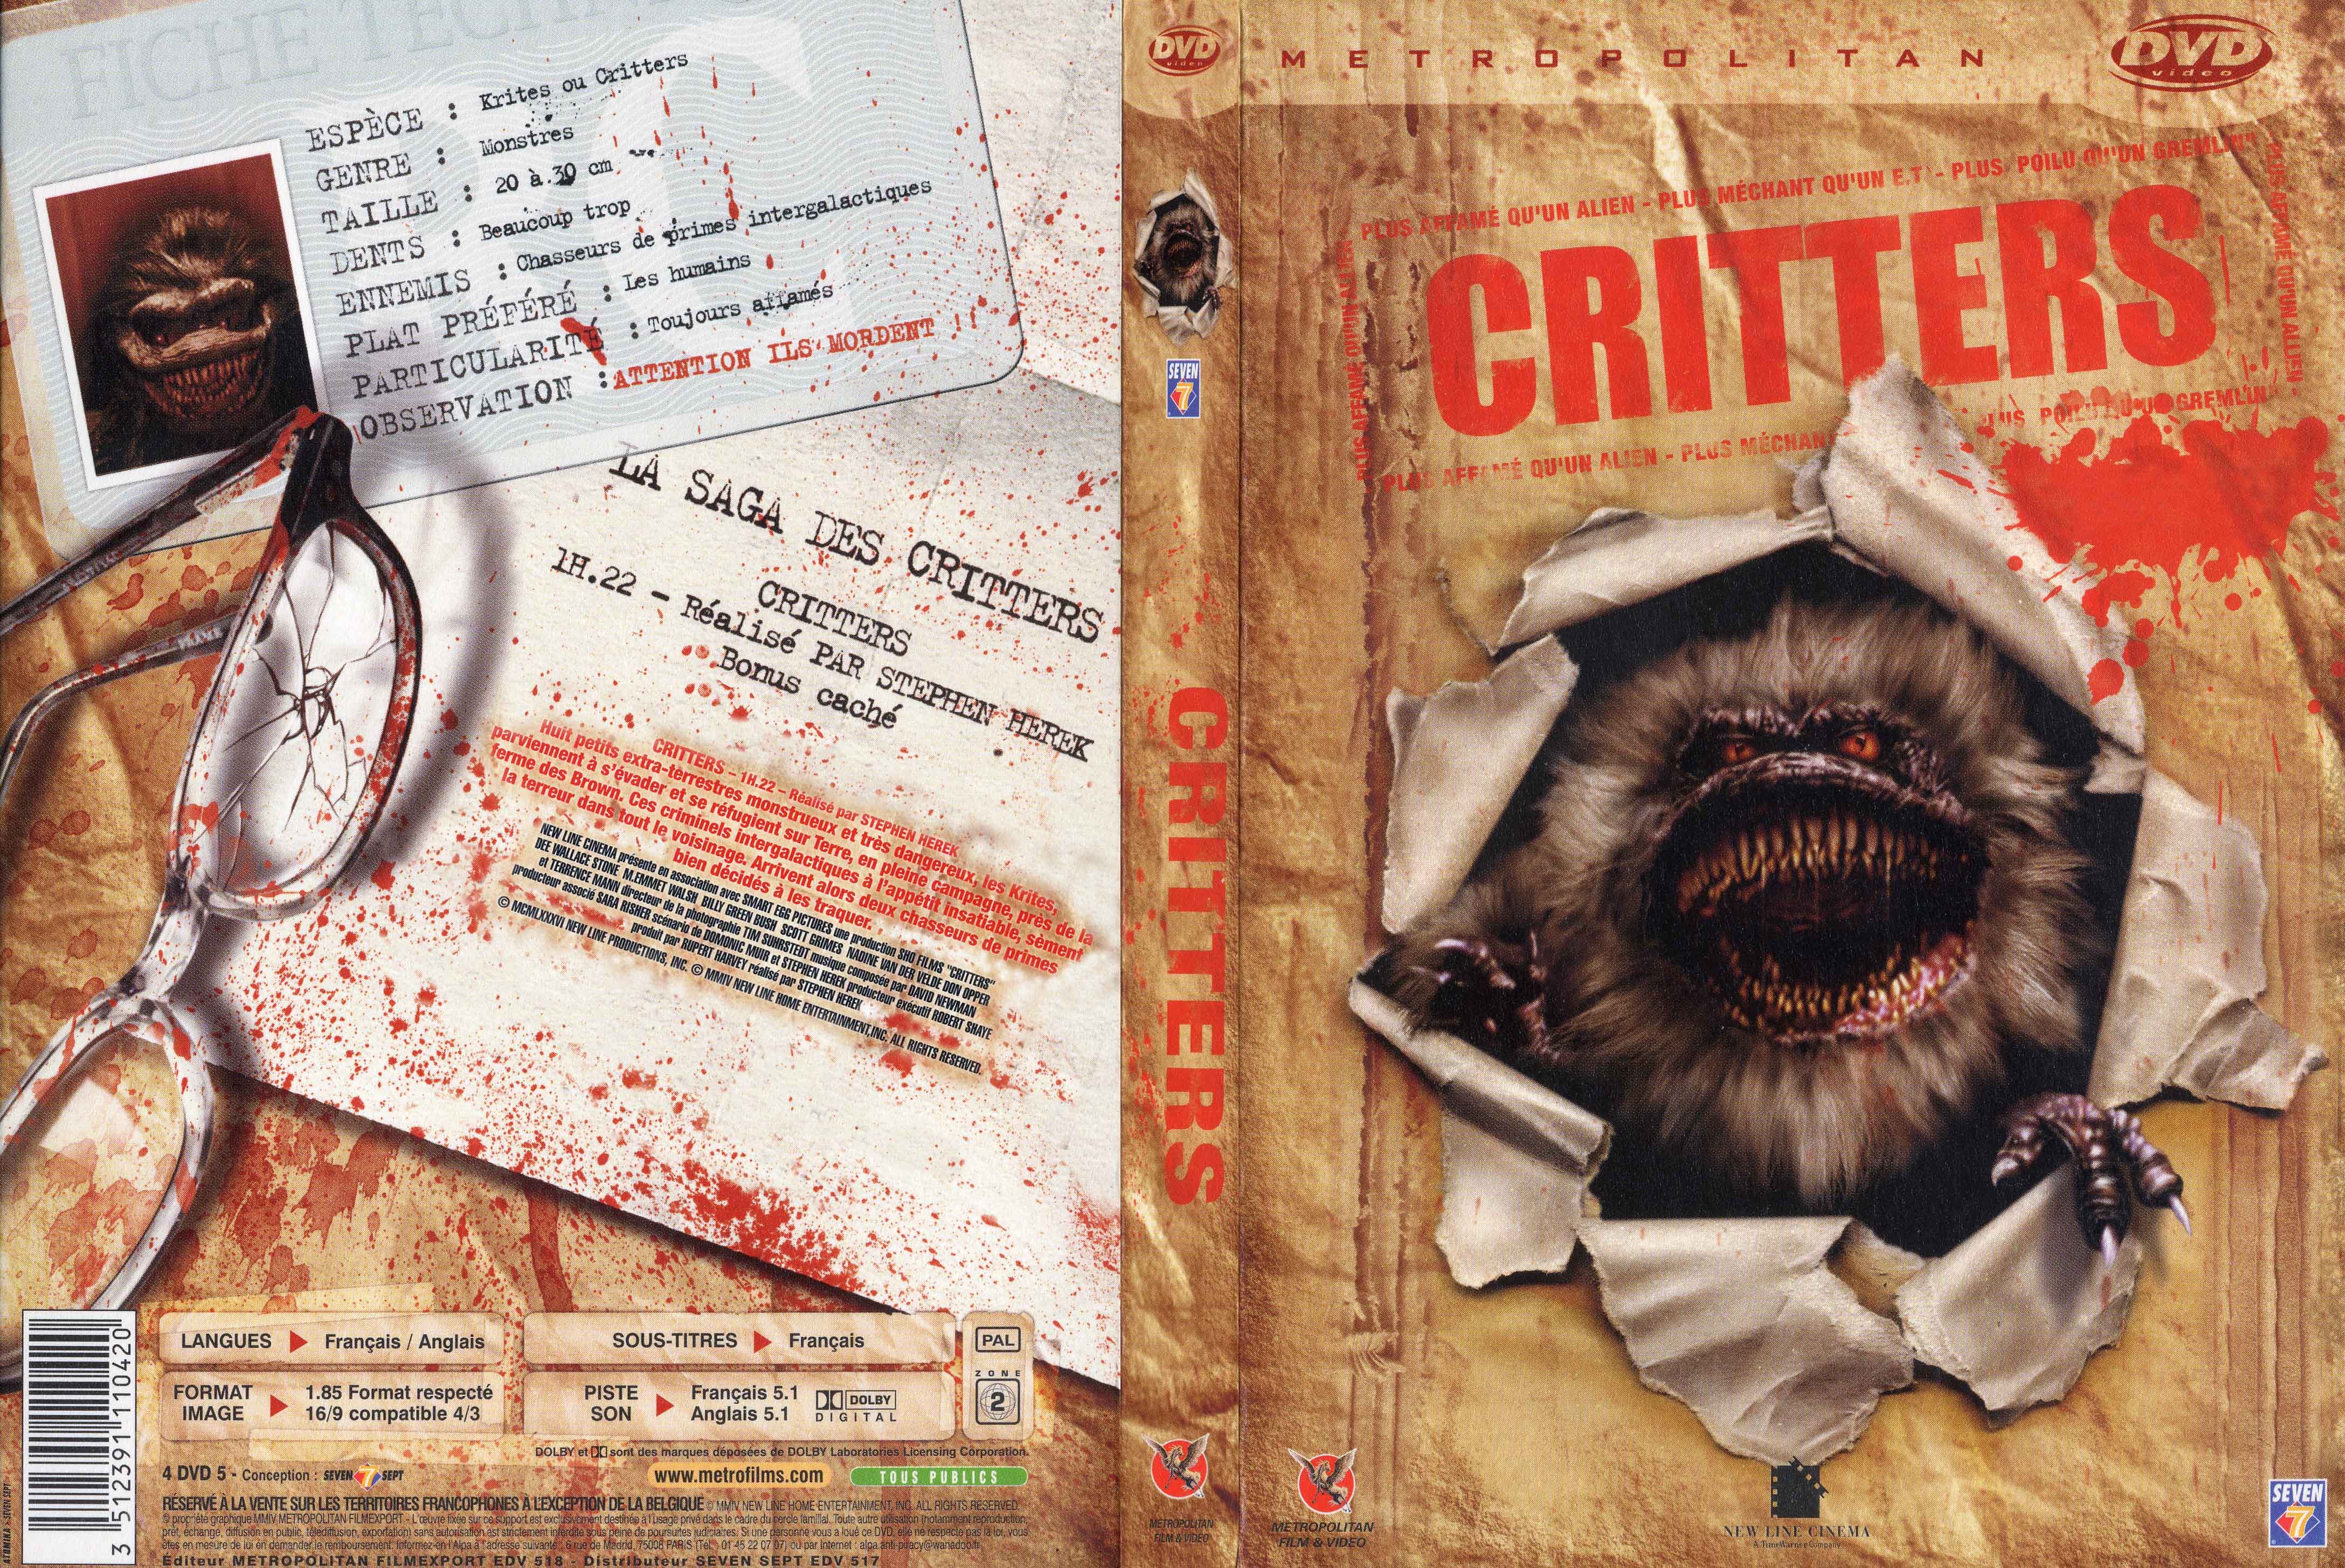 Jaquette DVD Critters